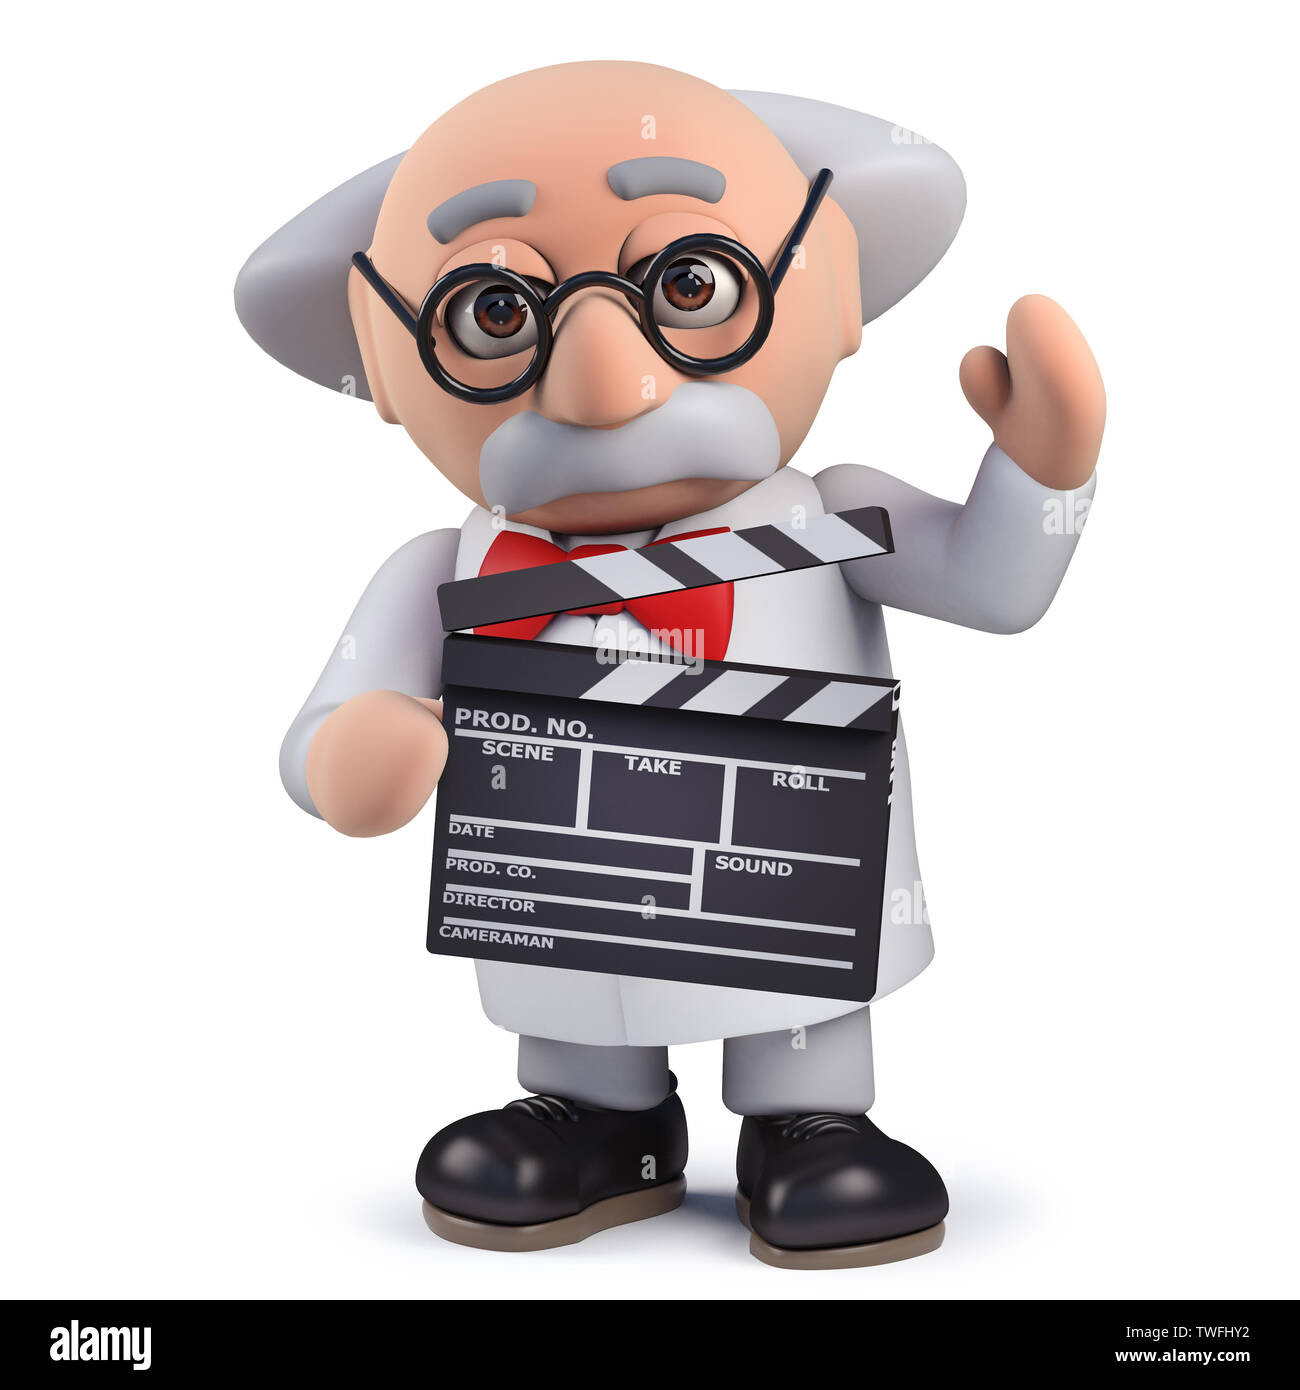 Render of a 3d scientist character using a film slate to direct a movie  Stock Photo - Alamy